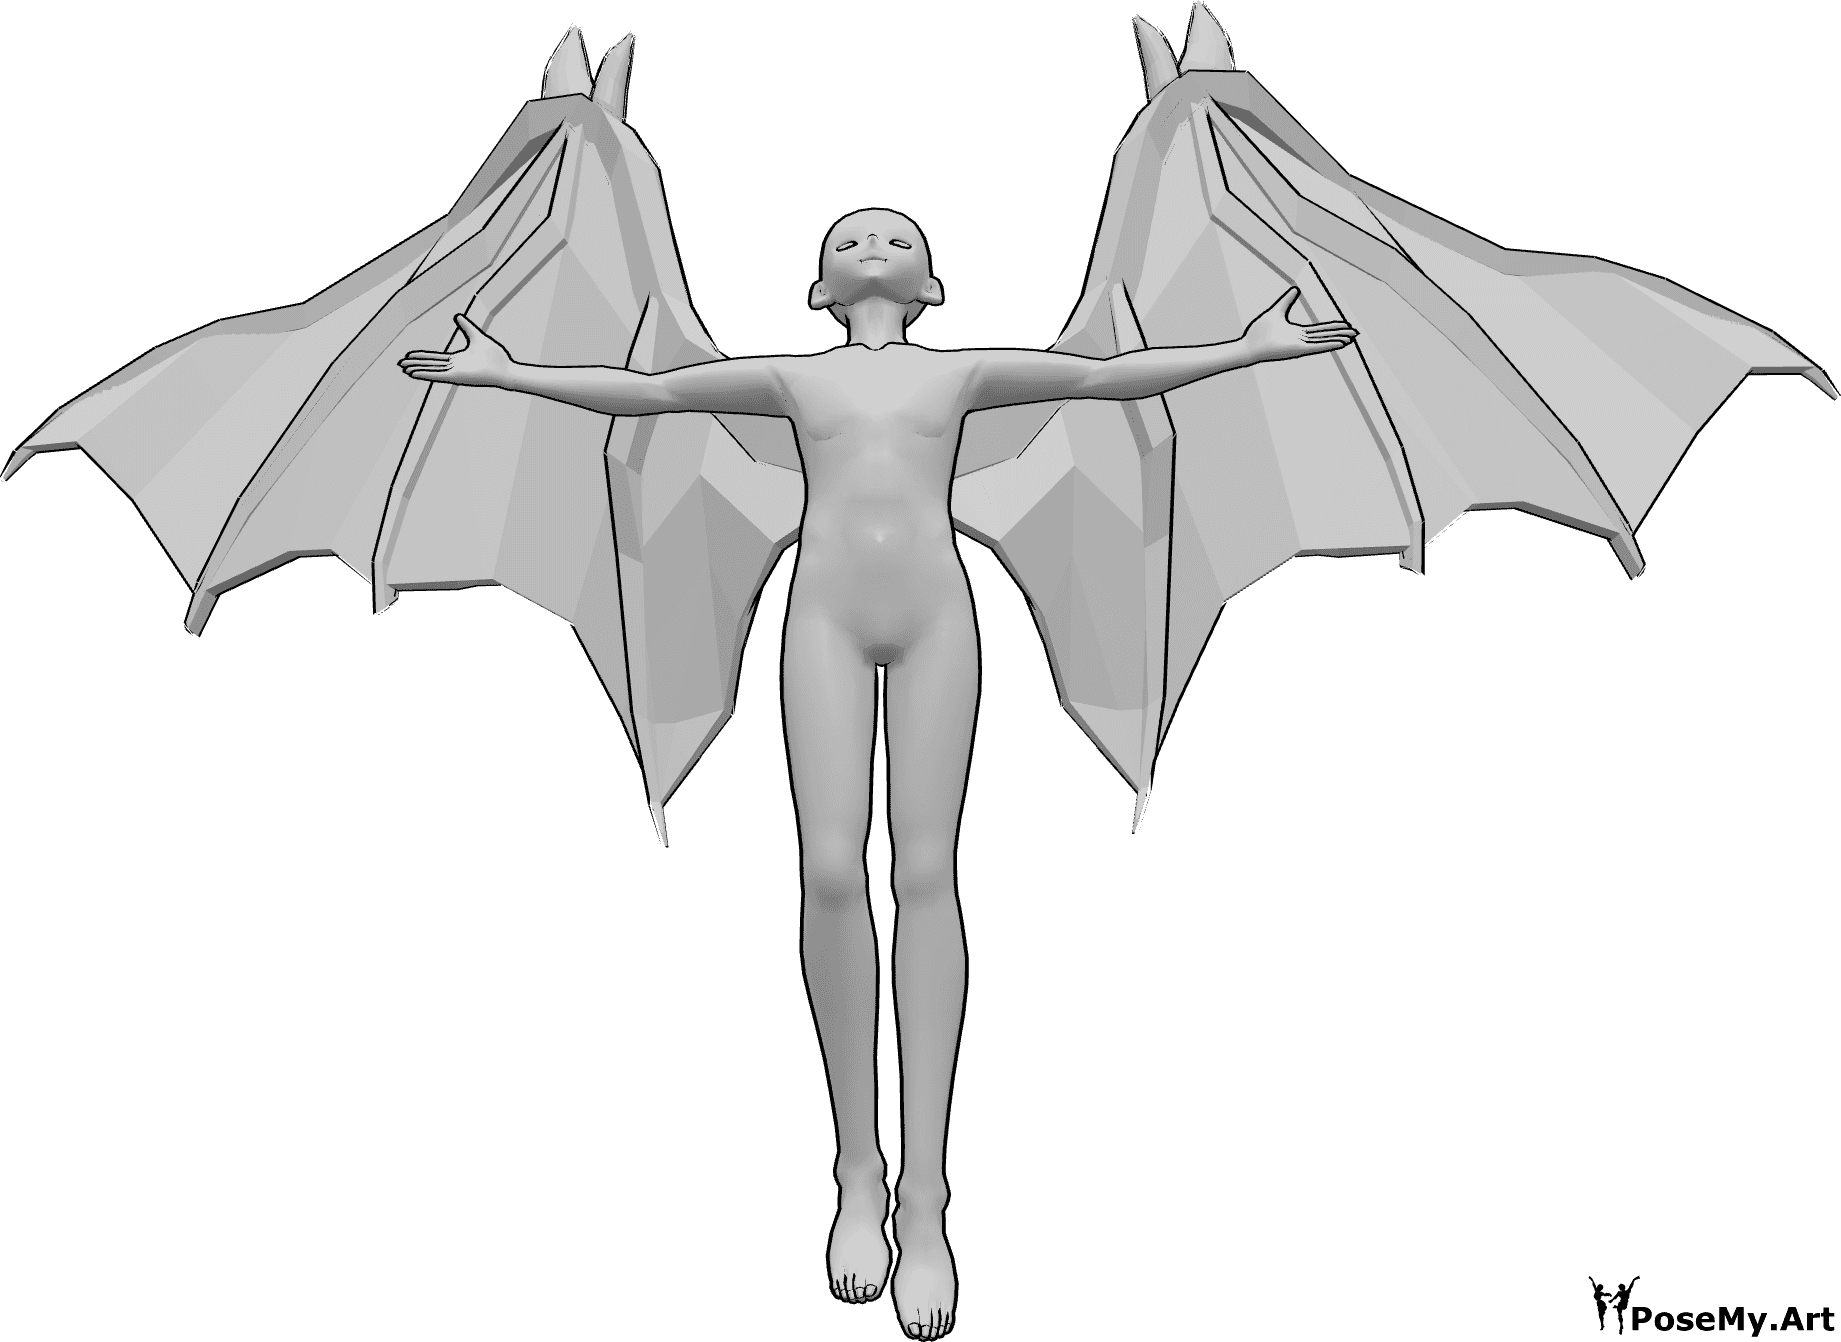 Pose Reference- Anime devil flying pose - Anime male with devil wings is flying, looking upwards and raising his hands